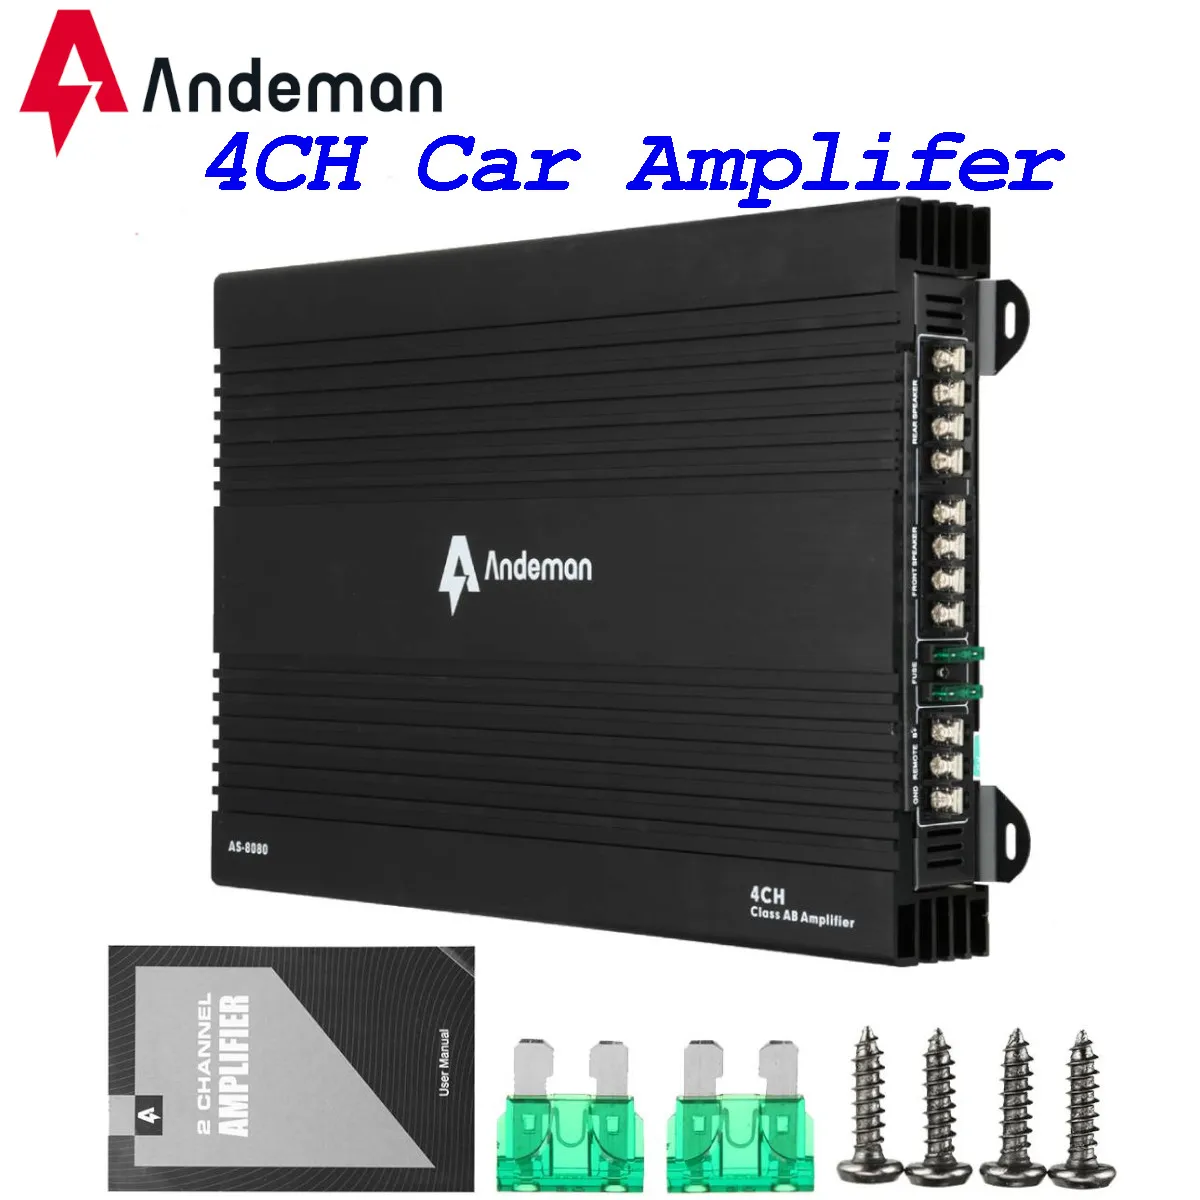 Andeman 4 Channel 12V AS-8080 Car Amplifers 4CH Powerful Mini HiFi Digital Stereo Audio Bass Power Amp Device Cars Subwoofer